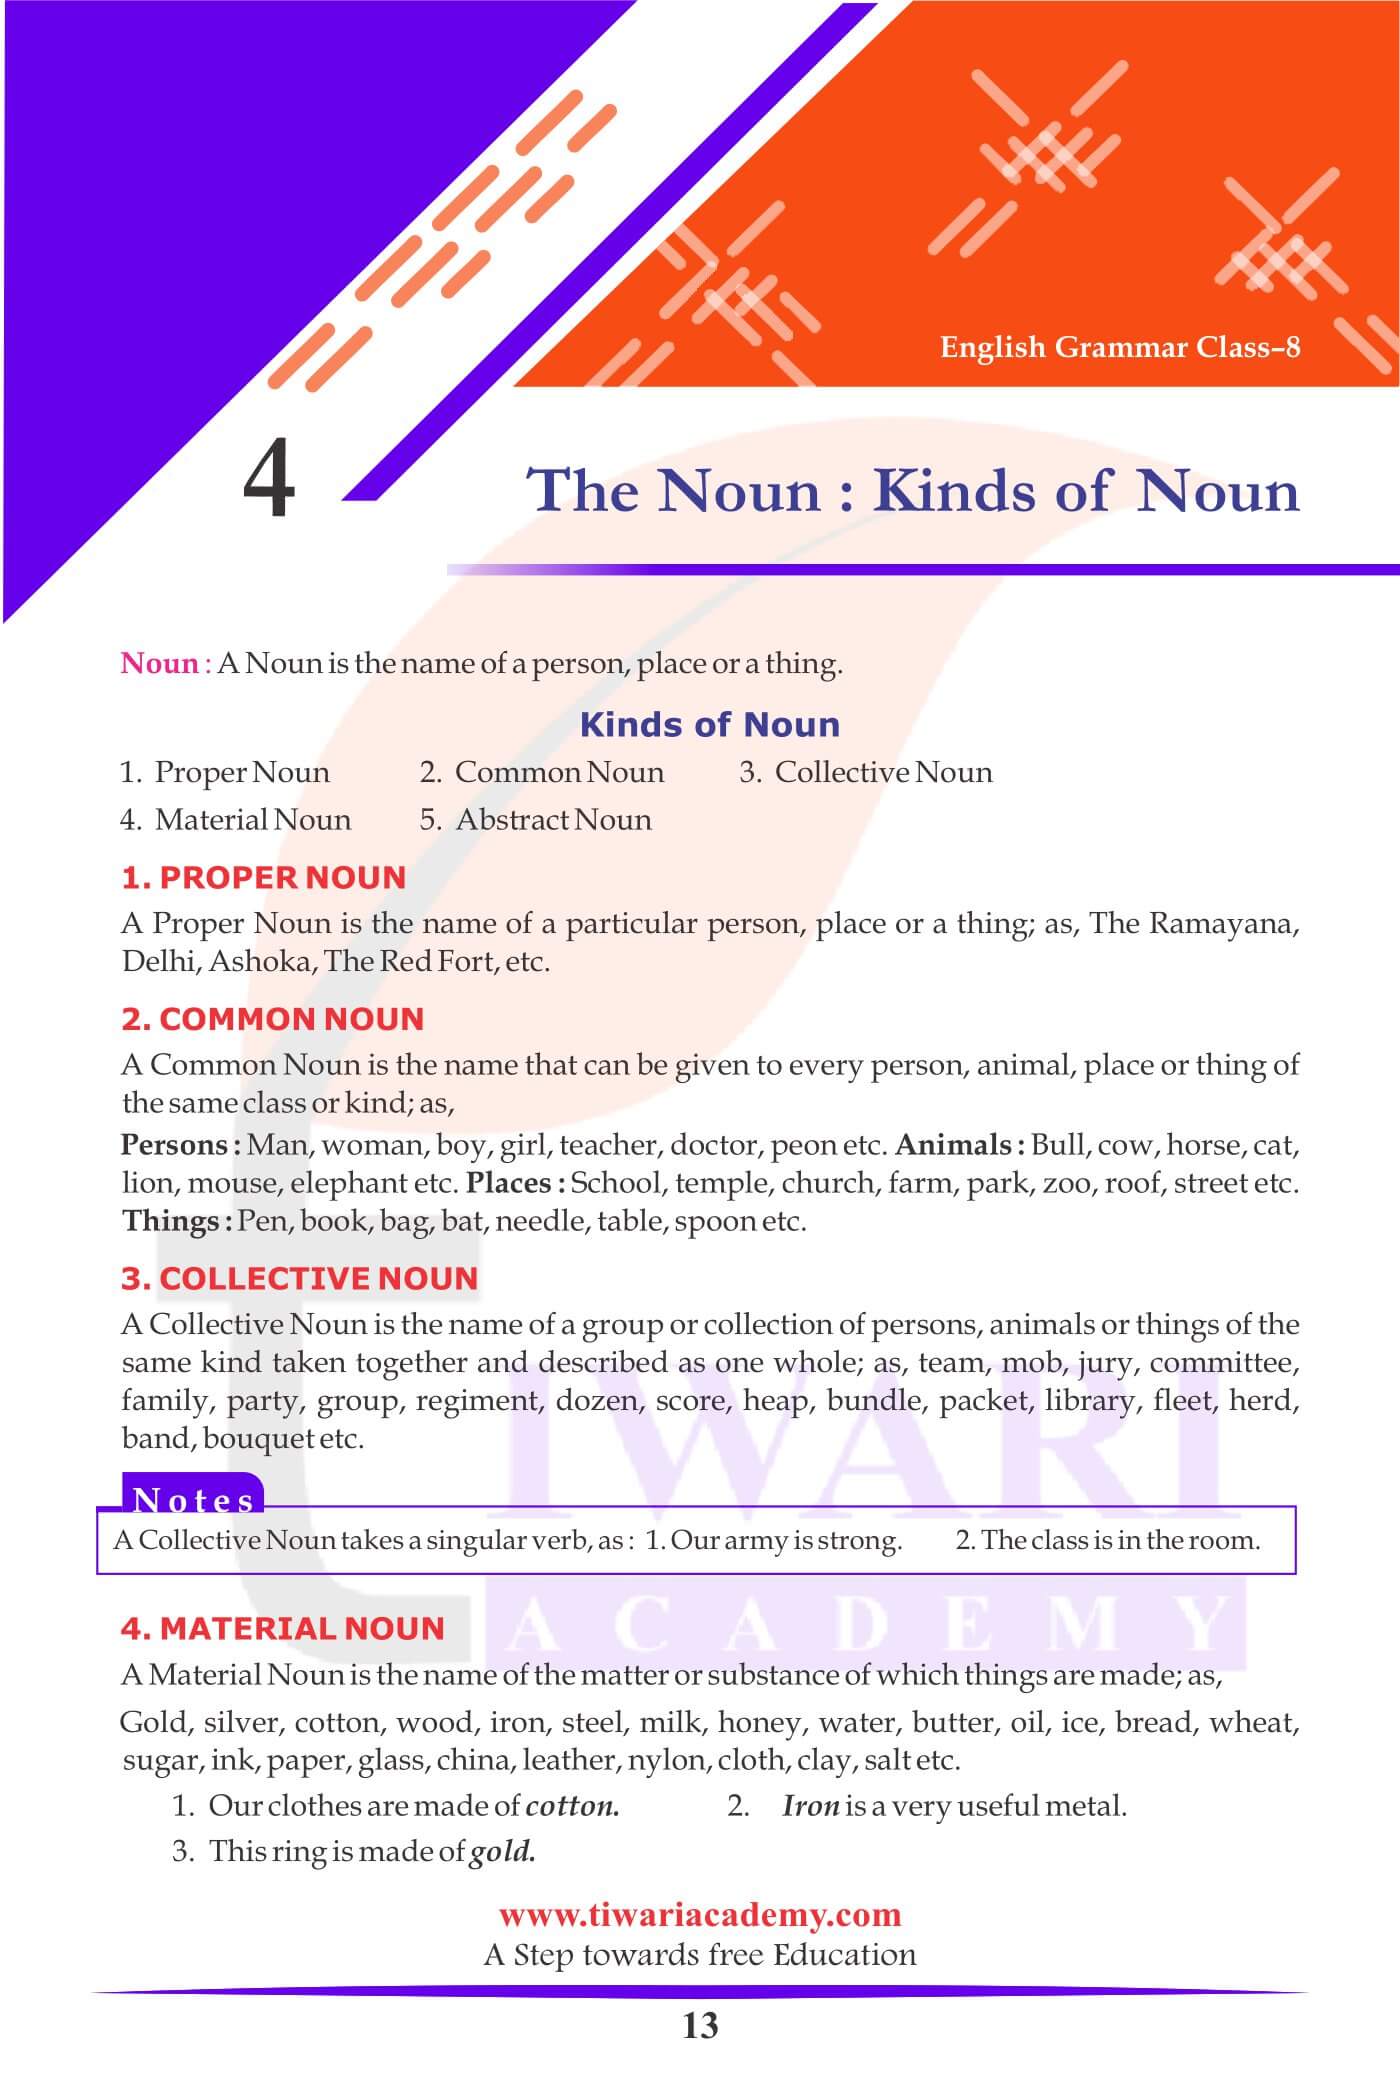 Nouns - Definition, Types and Rules with Examples in English Grammar